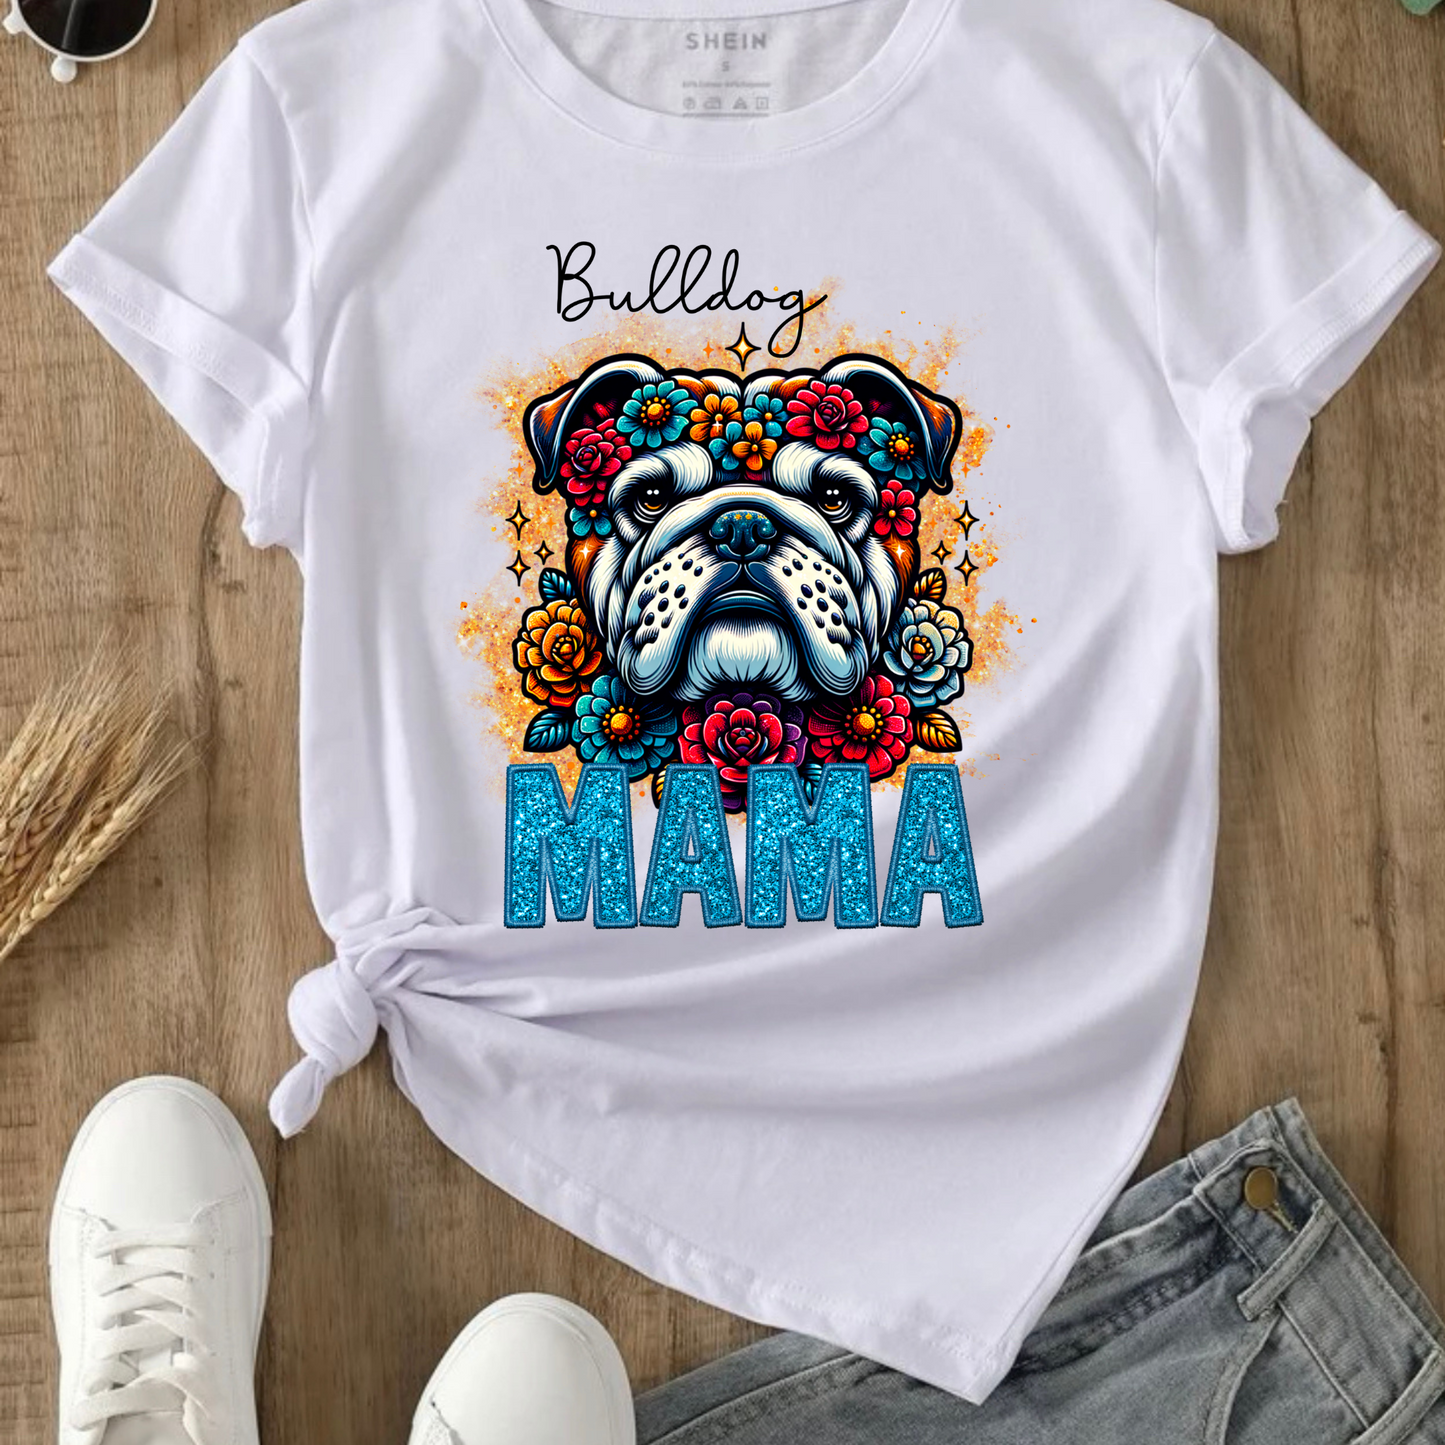 BULLDOG  MAMA DESIGN! YOU CHOOSE COLOR AND STYLE! TEE OR CREWNECK! BLEACHED OR NON-BLEACHED